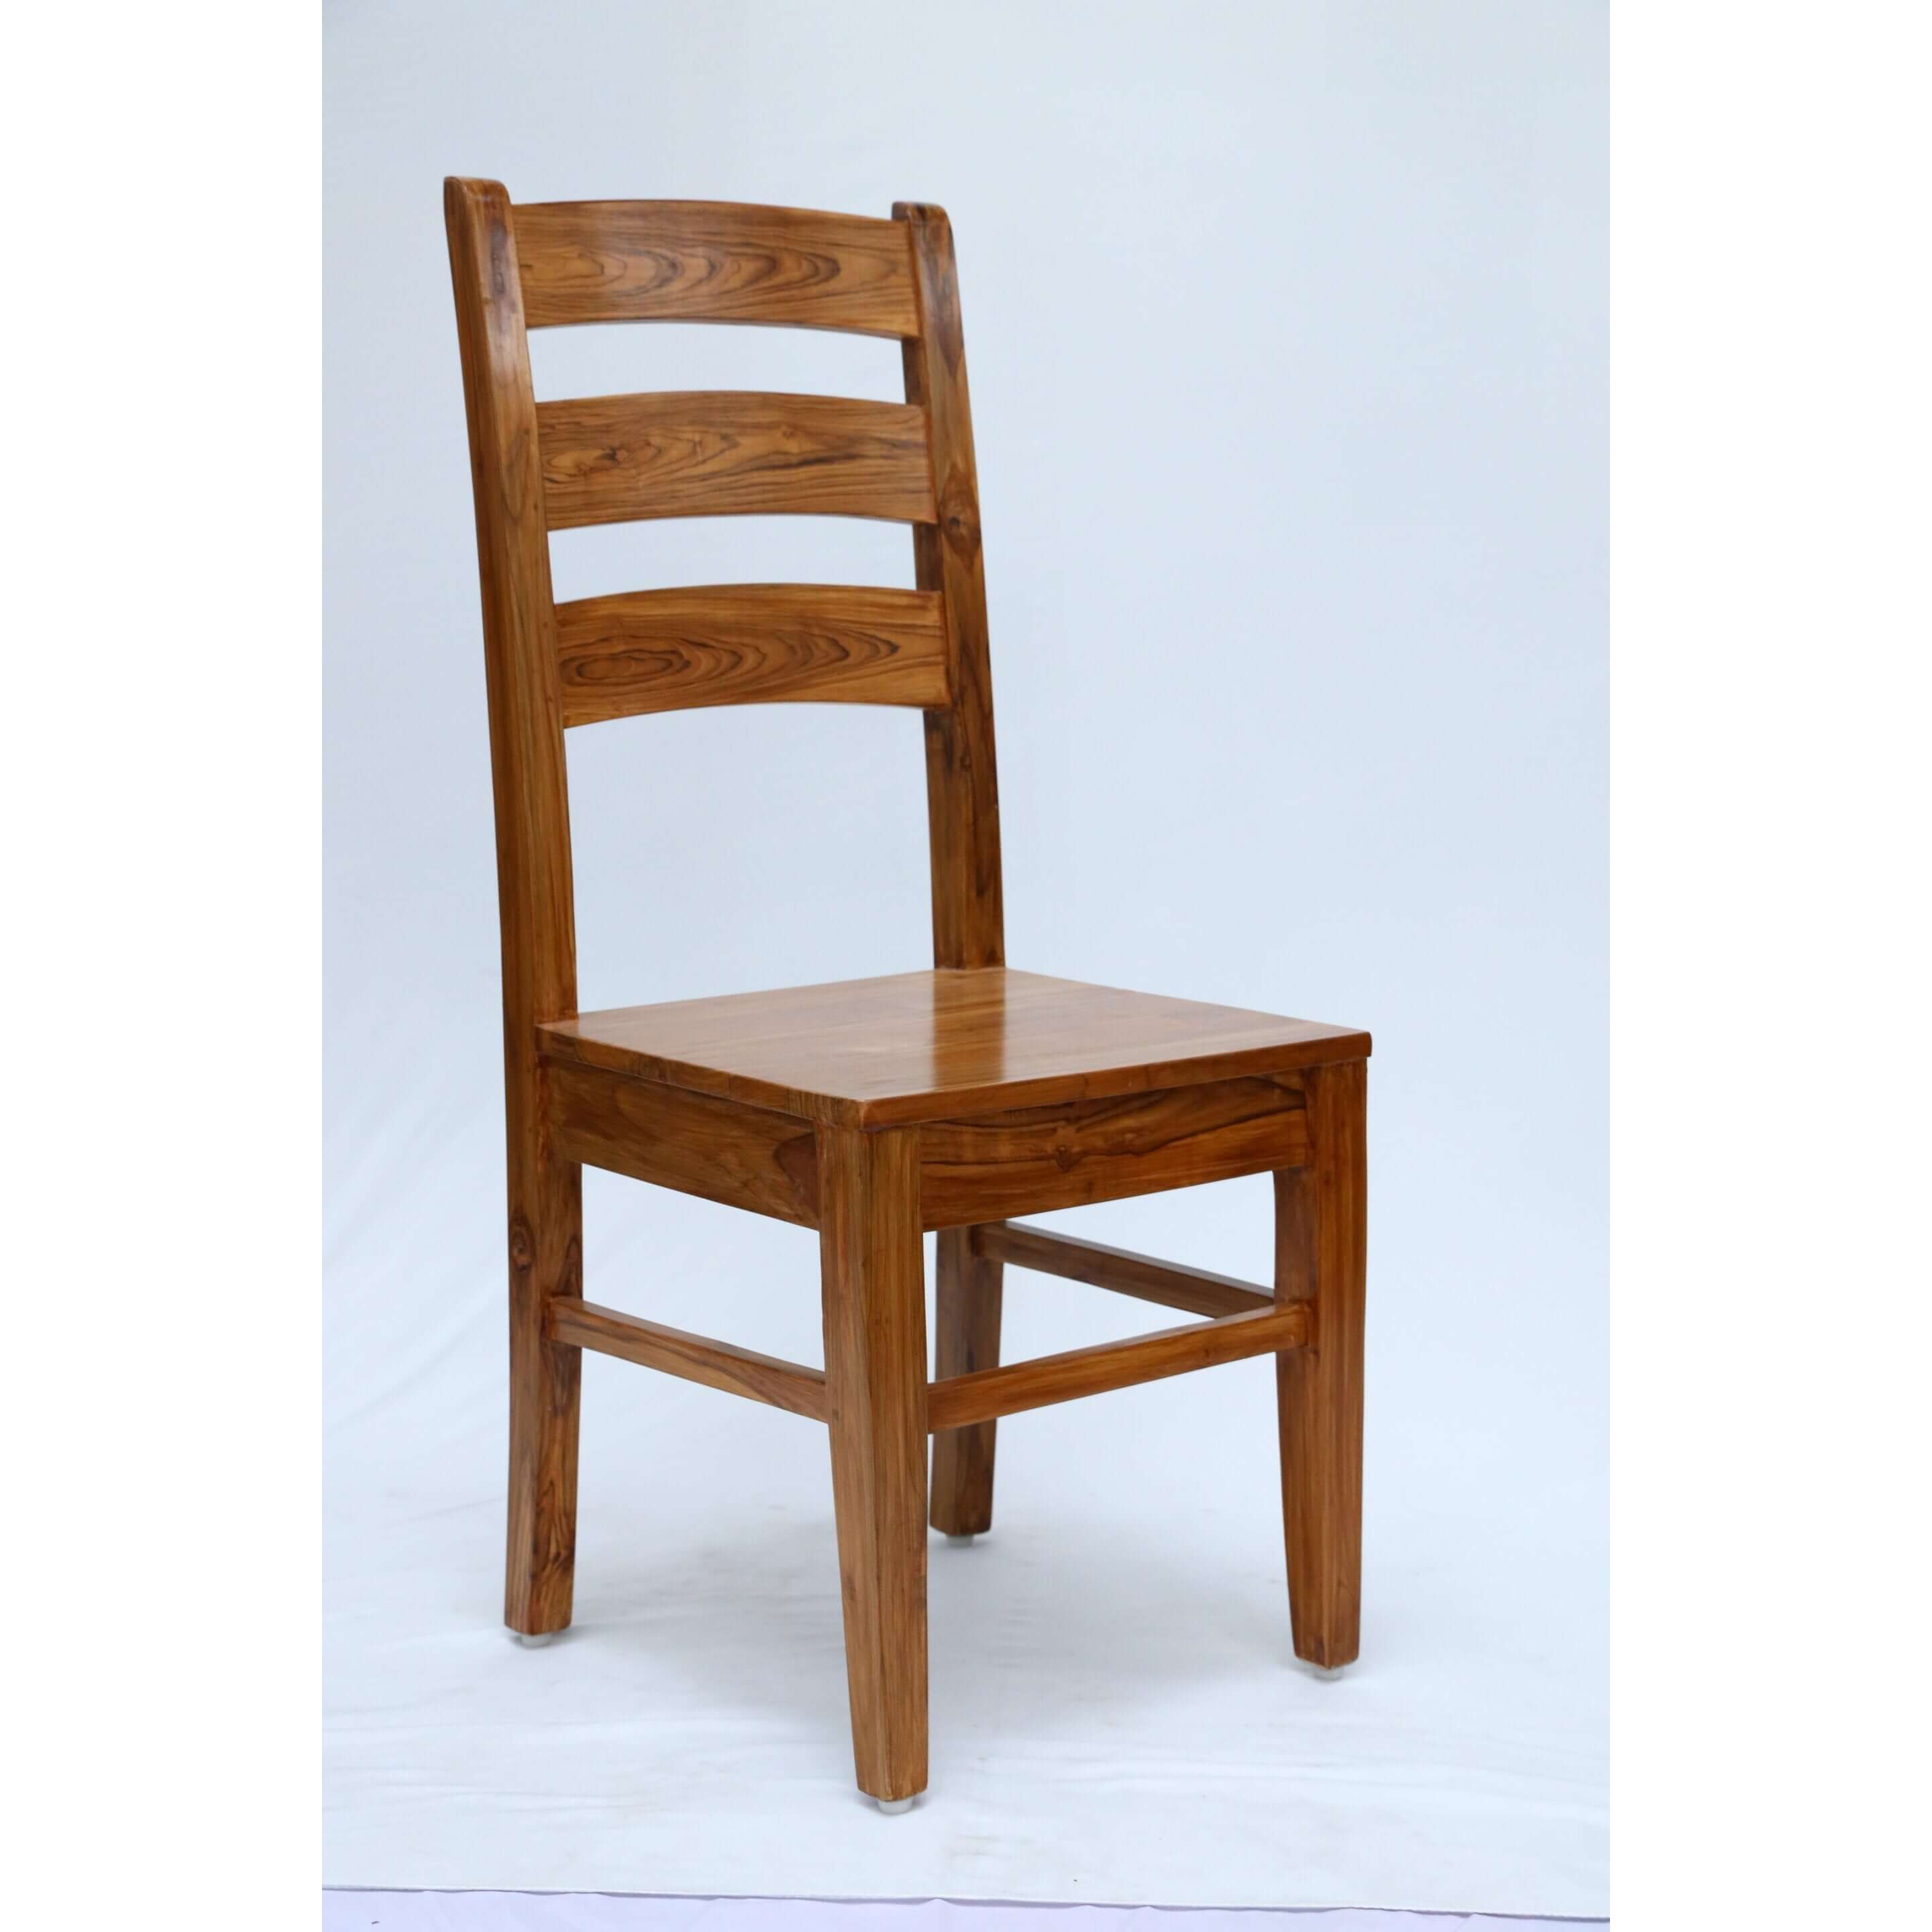 Teak wood dining chair with a comfortable backrest tch-2301